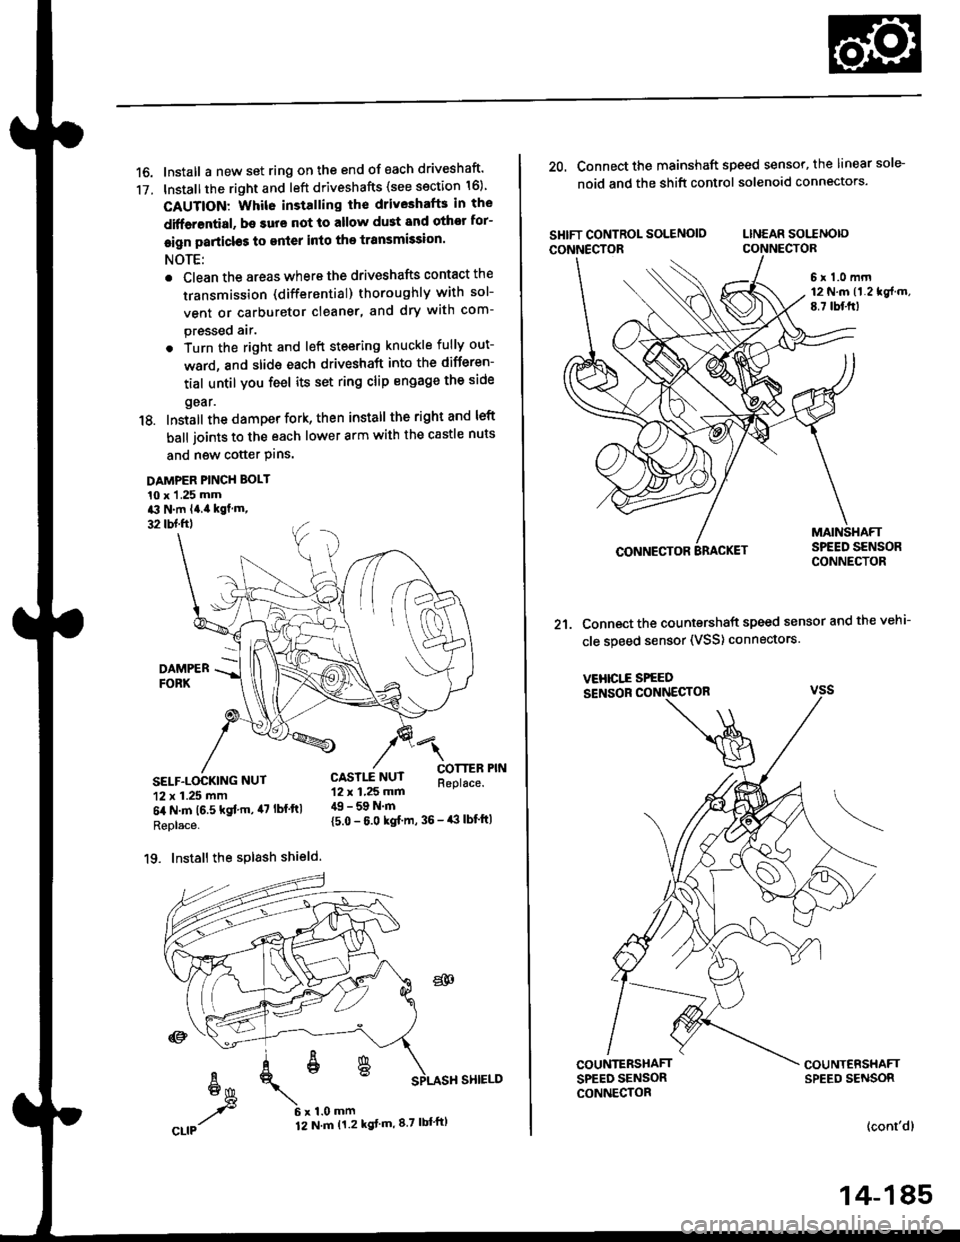 HONDA CIVIC 2000 6.G User Guide 16. Install a new set ring on the end of each driveshaft
17. Installthe right and left driveshafts (see ssction 16)
CAUTION: Whil6 installing the driveshafE in the
diffarential, be surs not lo allow 